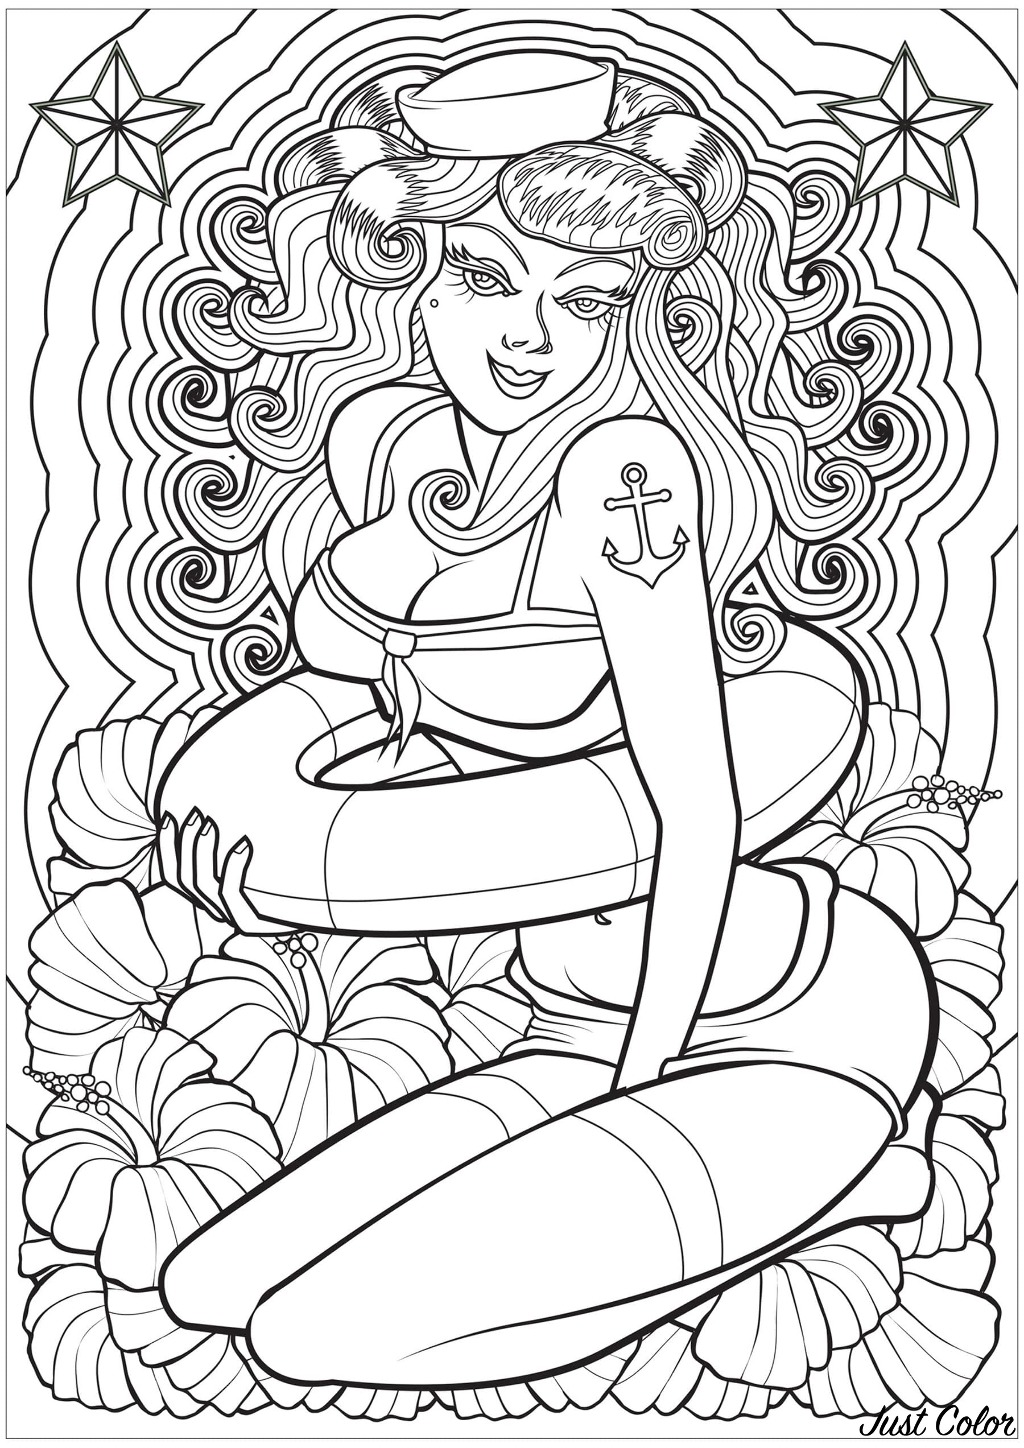 Sexy woman with sailor tattoo, and various elements to color in the background